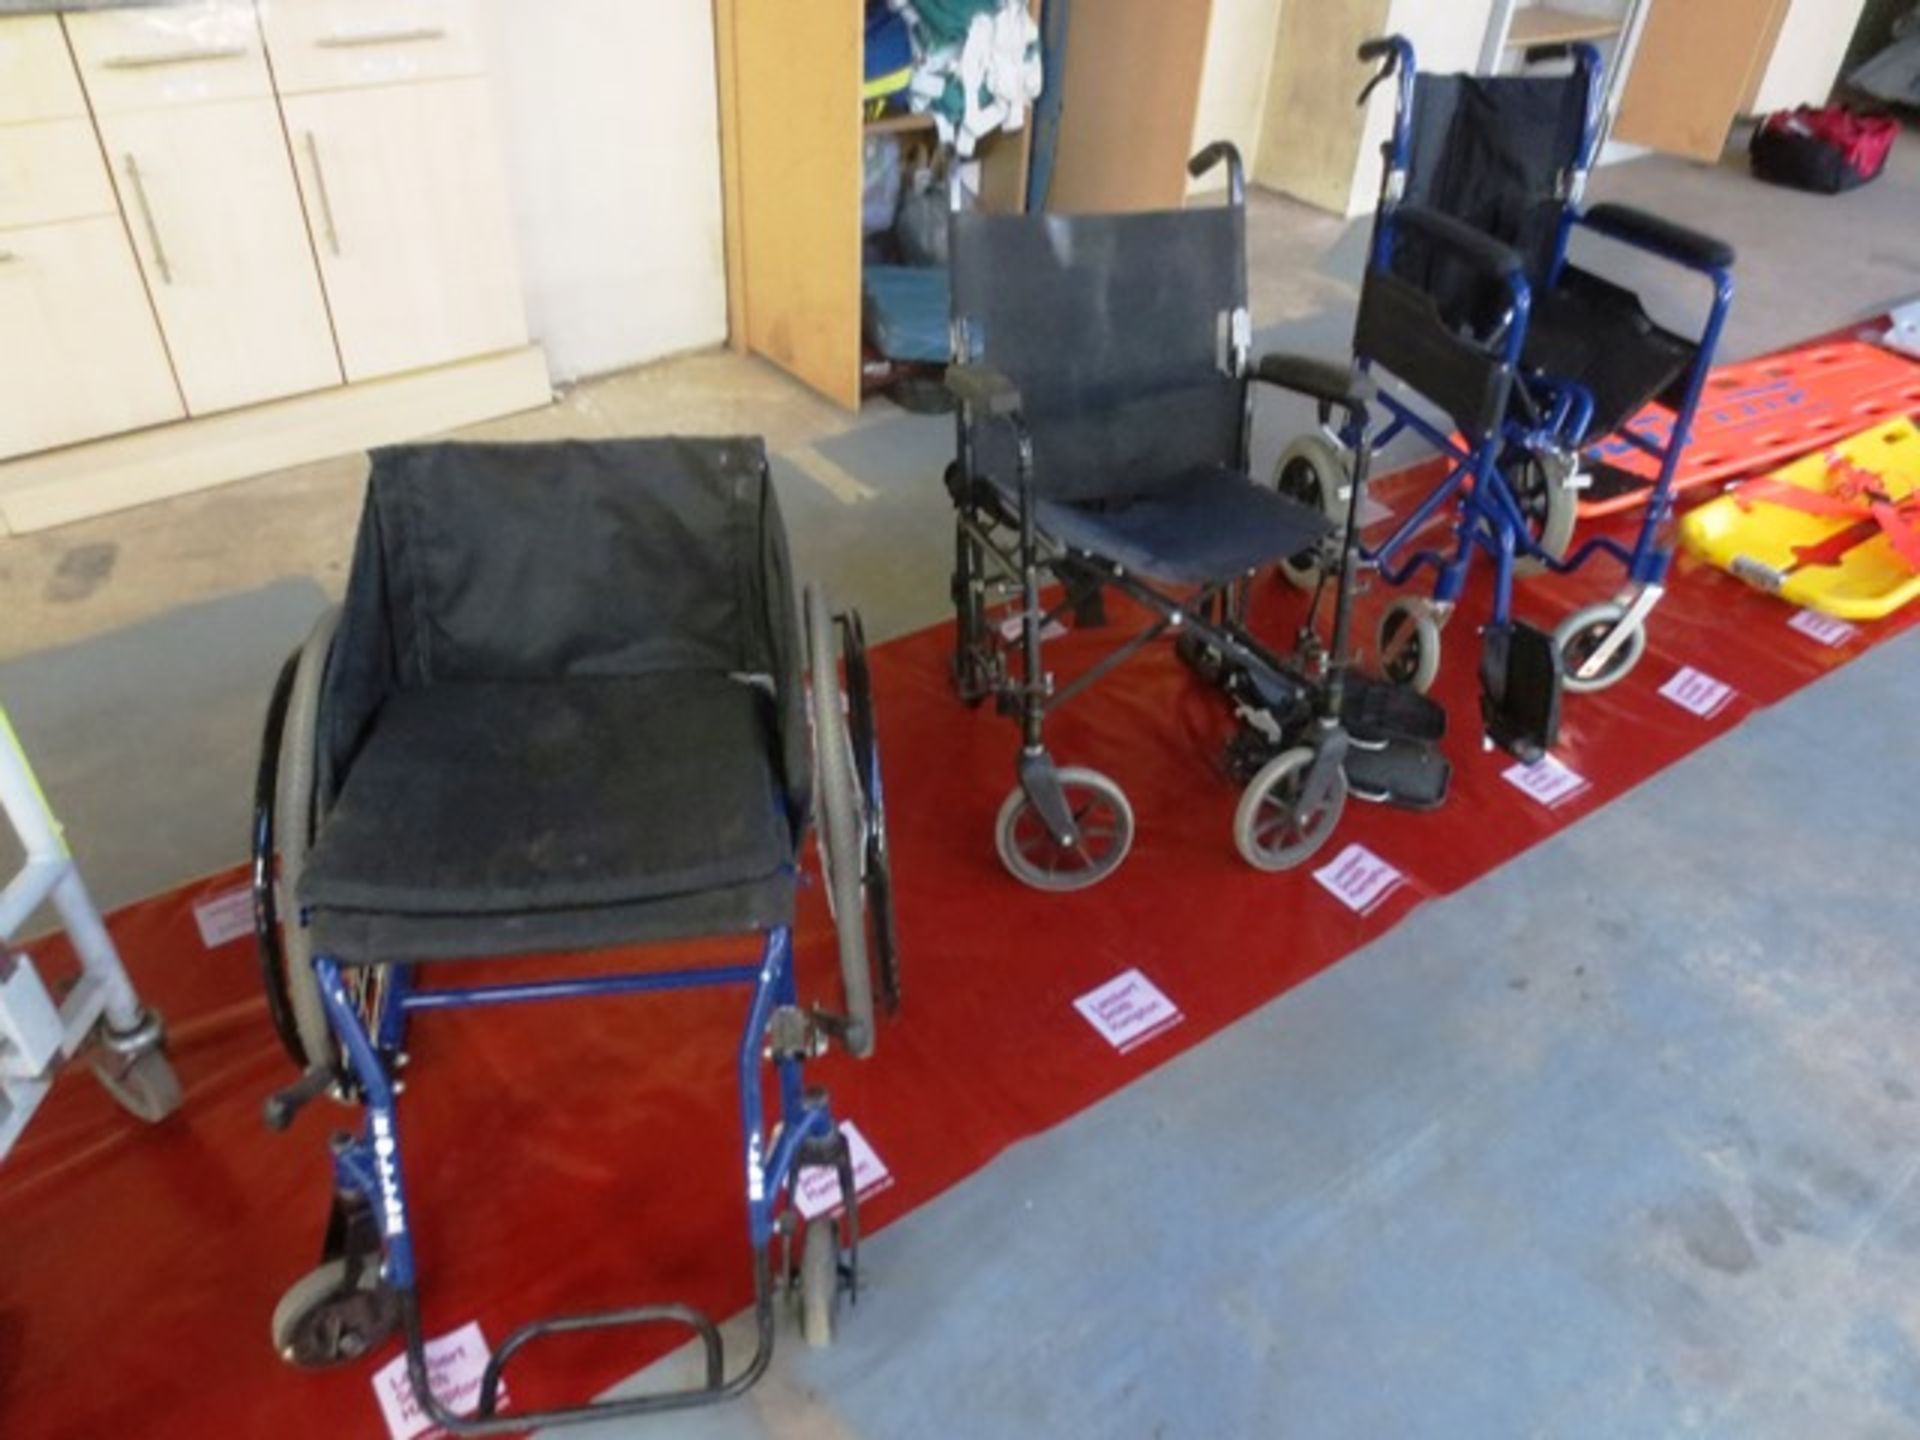 Three out of commission adjustable wheelchairs